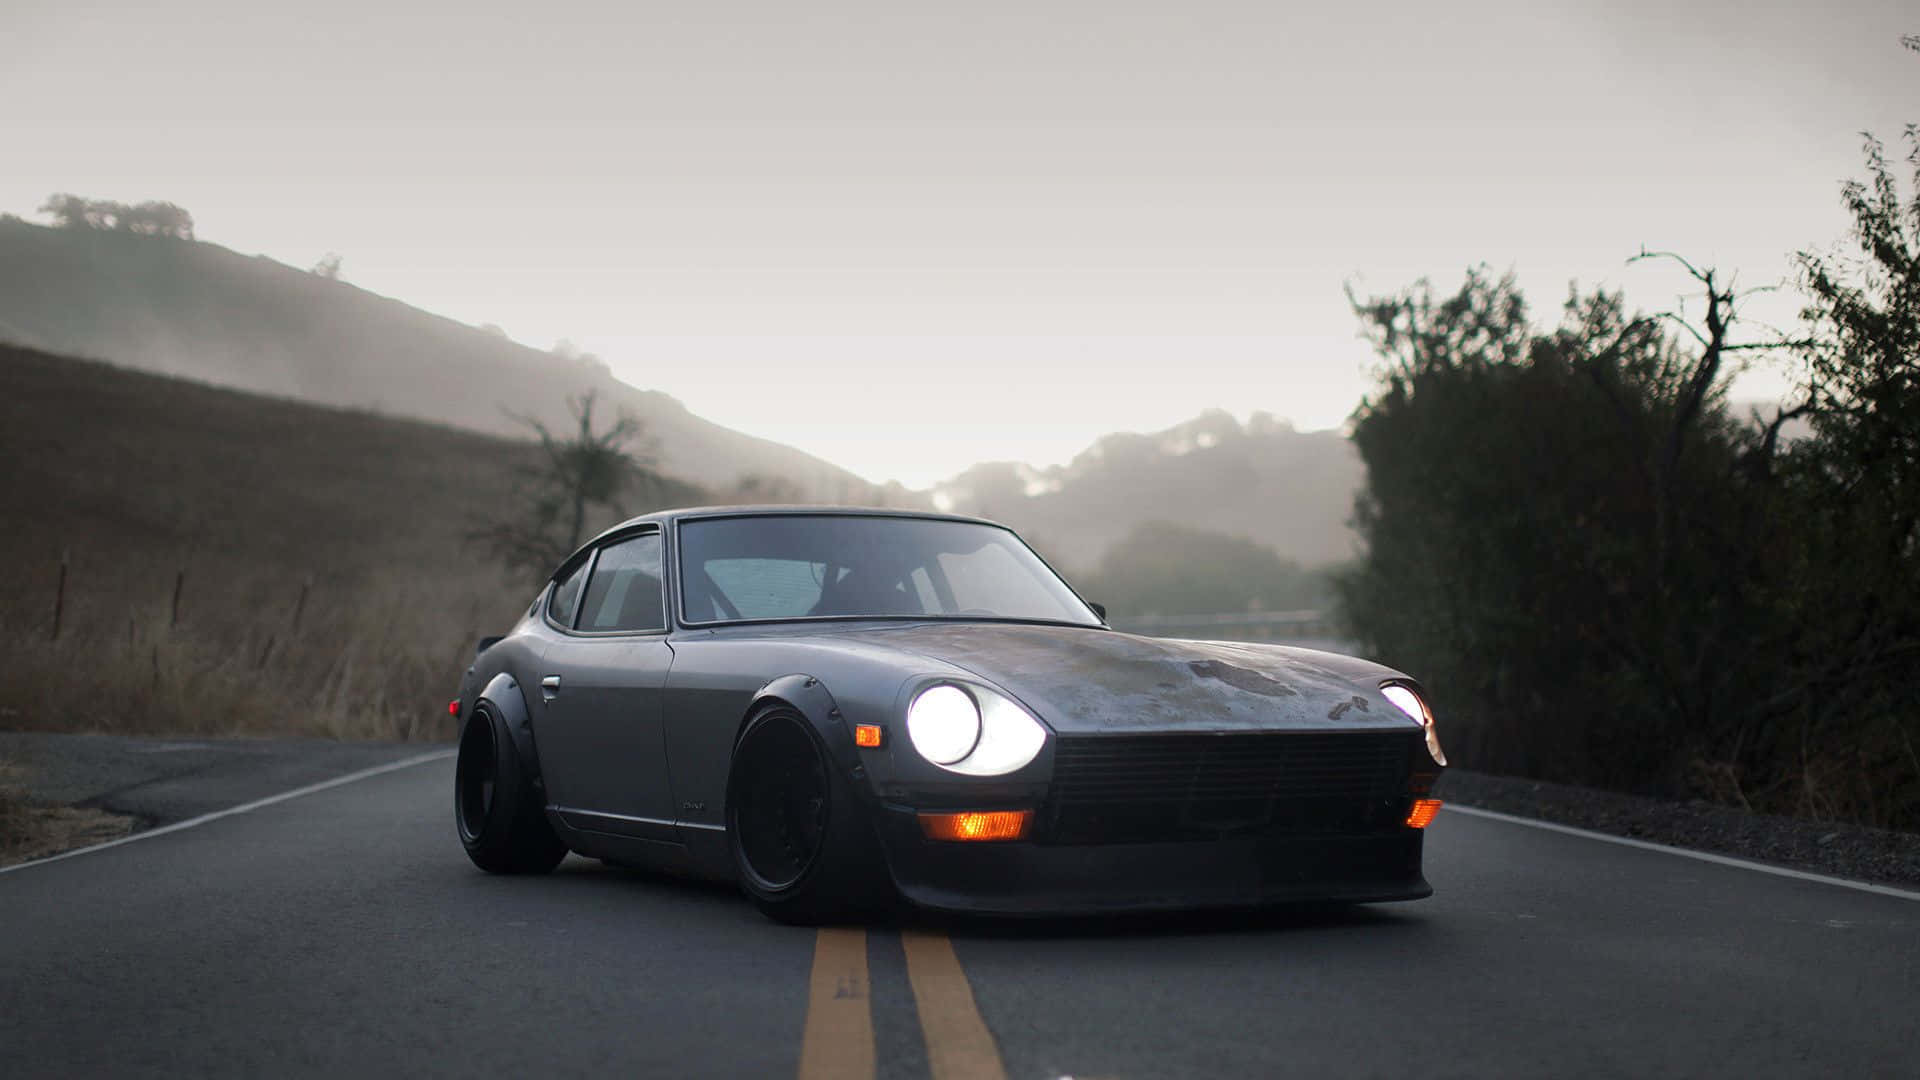 Sleek And Stylish Datsun On The Road Background